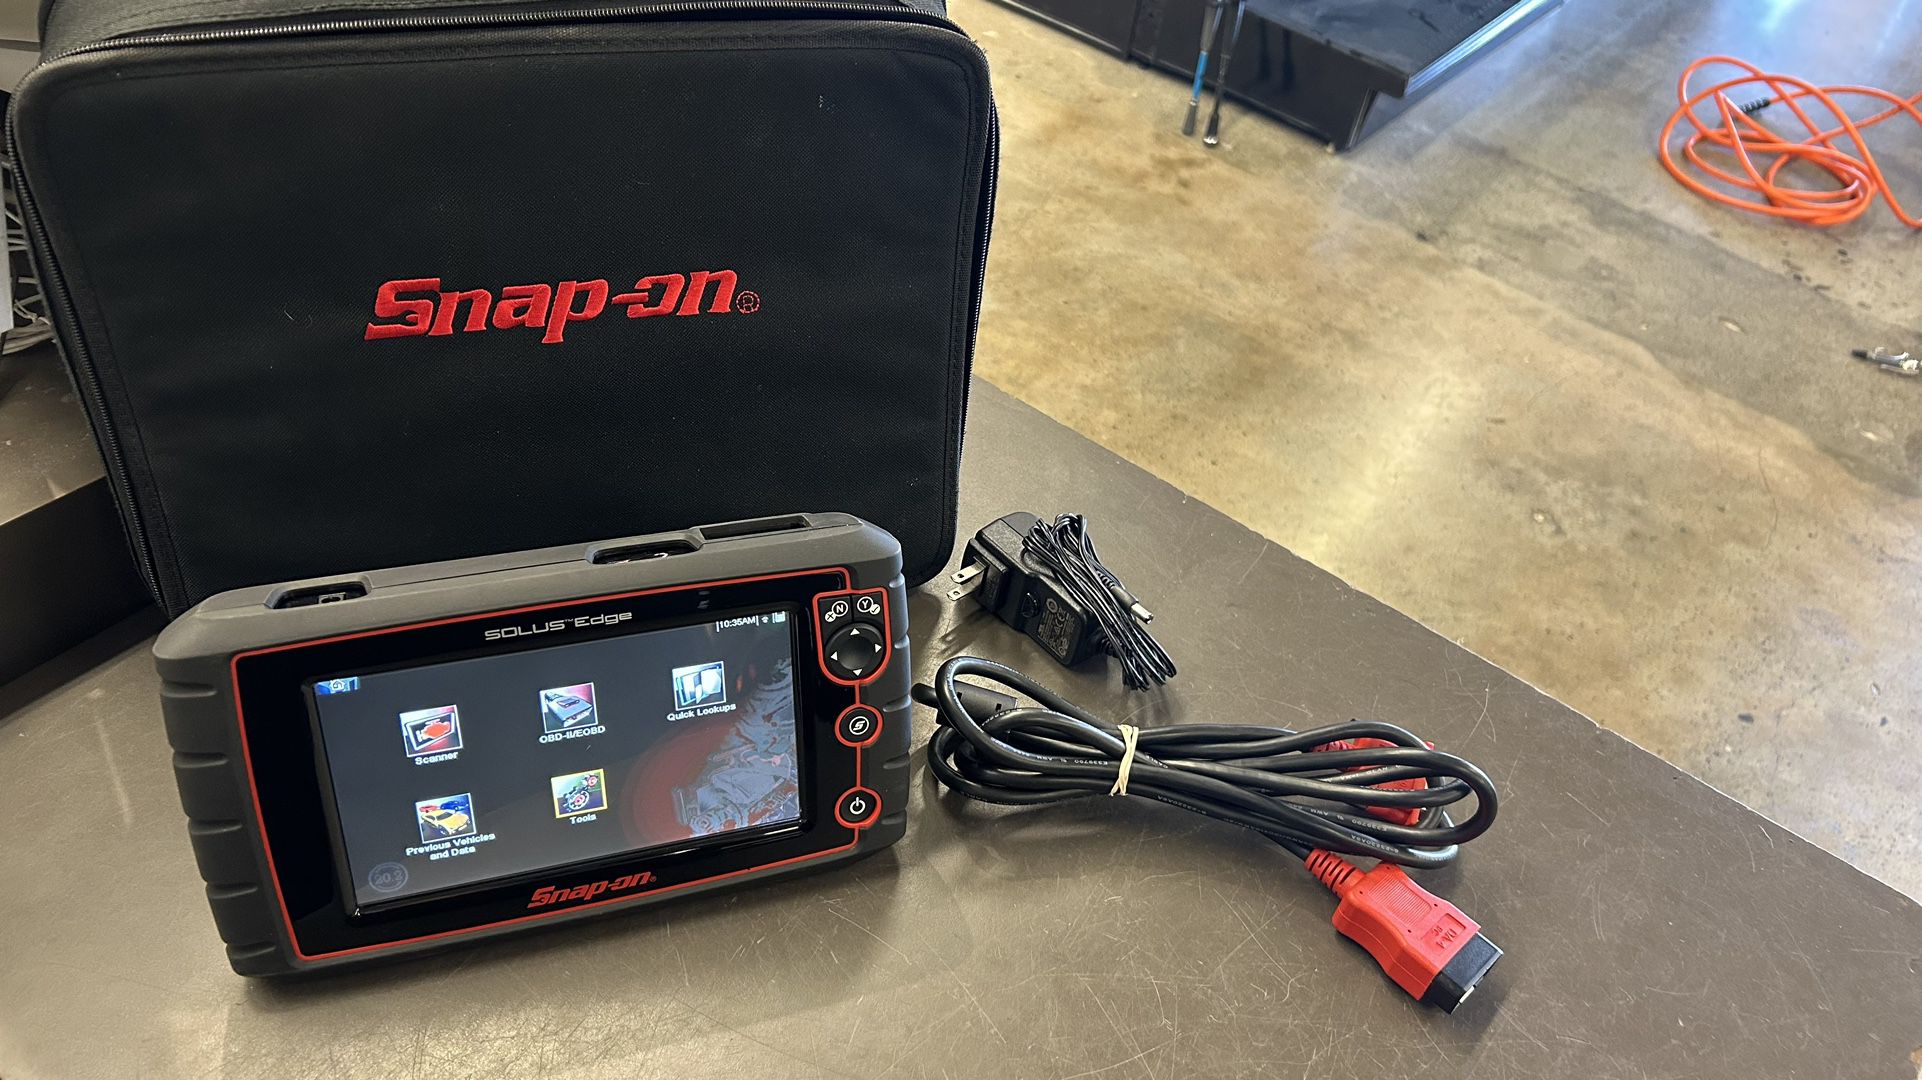 Snap-On SOLUS Edge Scan Tool EESC320 20.2 Scan Tool w charger and case no trades pick up im Tacoma 